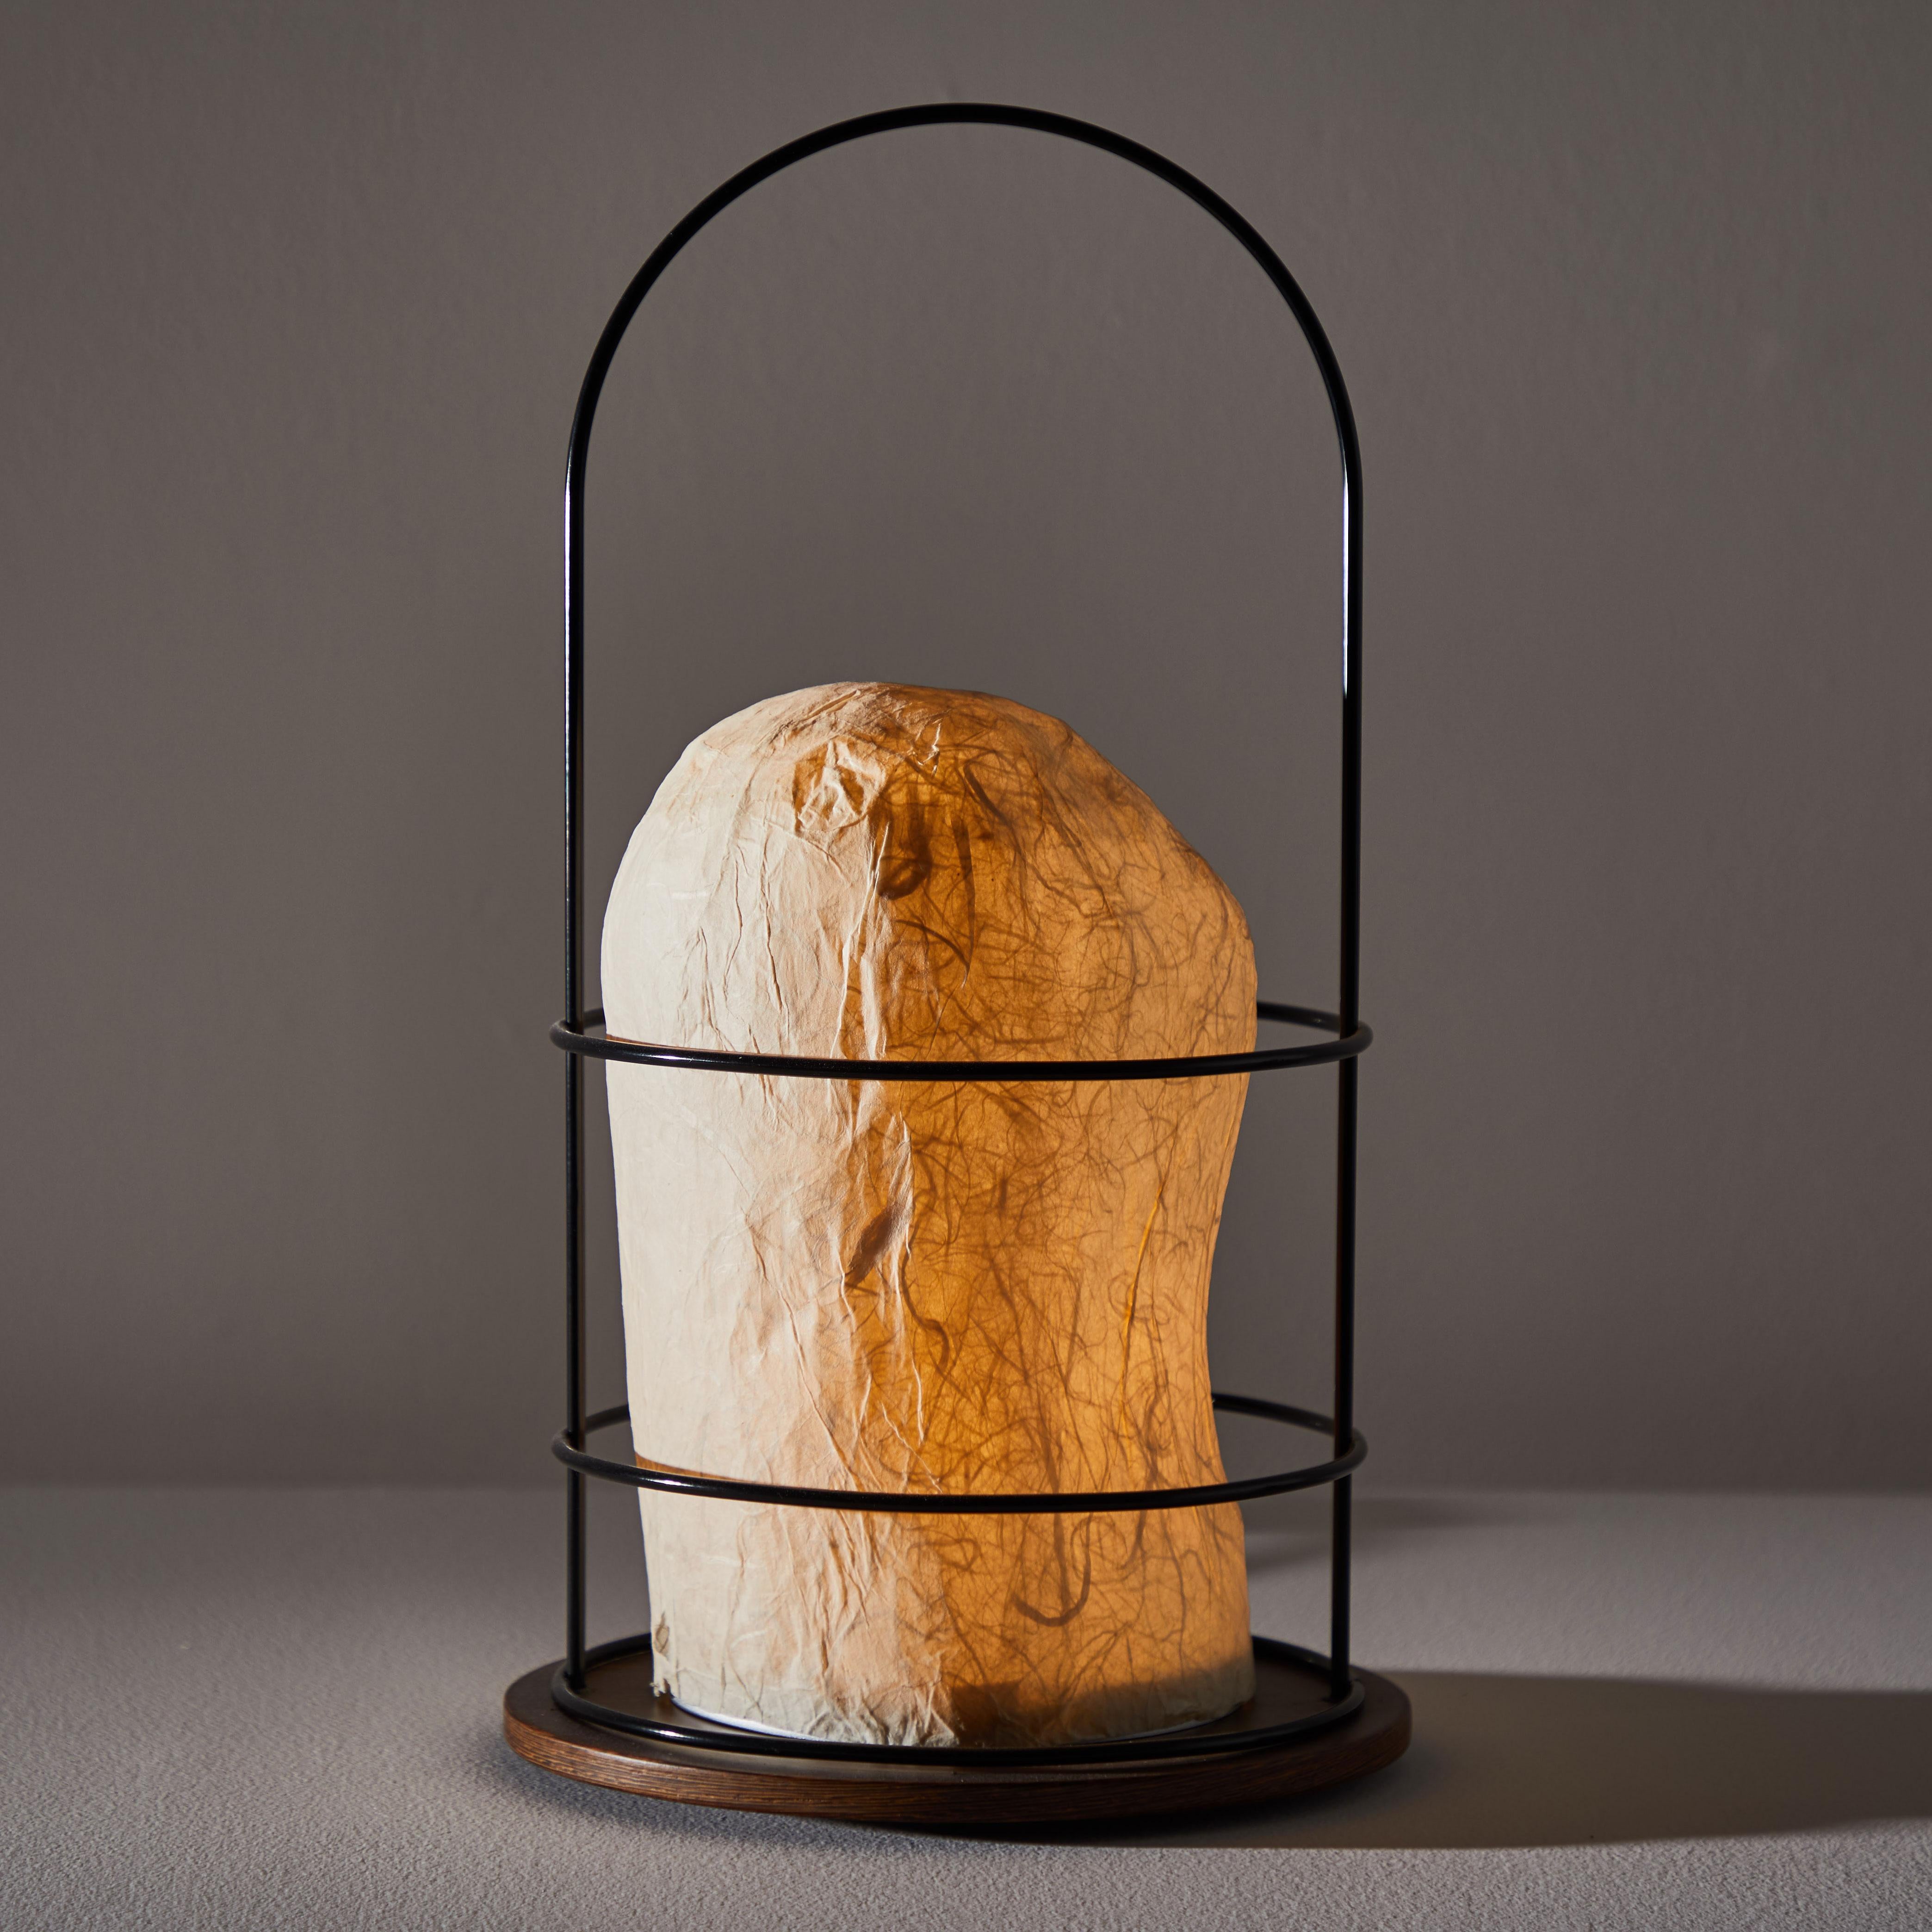 Model WL 01 A table lamp by Andrea Branzi. Designed and manufactured in Milan, 1995-1996. Black metal wire, wood, rice paper. Original cord. Takes one E27 25w maximum bulb. Bulbs provided as a one time courtesy. Literature: Fiell, Charlotte & Peter,